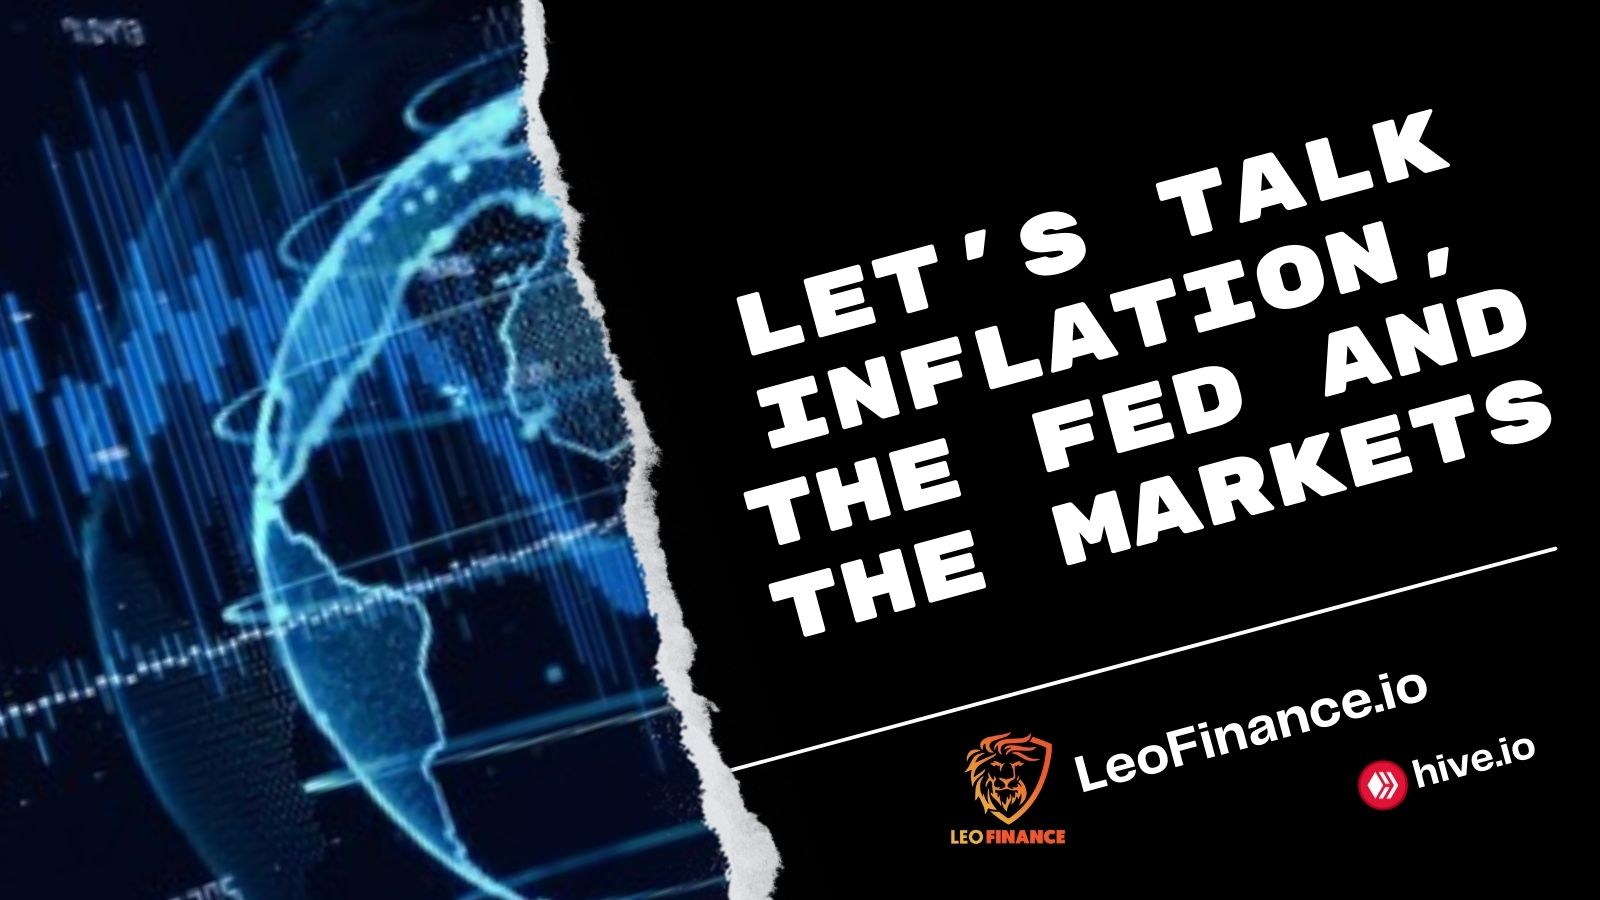 @bitcoinflood/let-s-talk-inflation-the-fed-and-the-markets